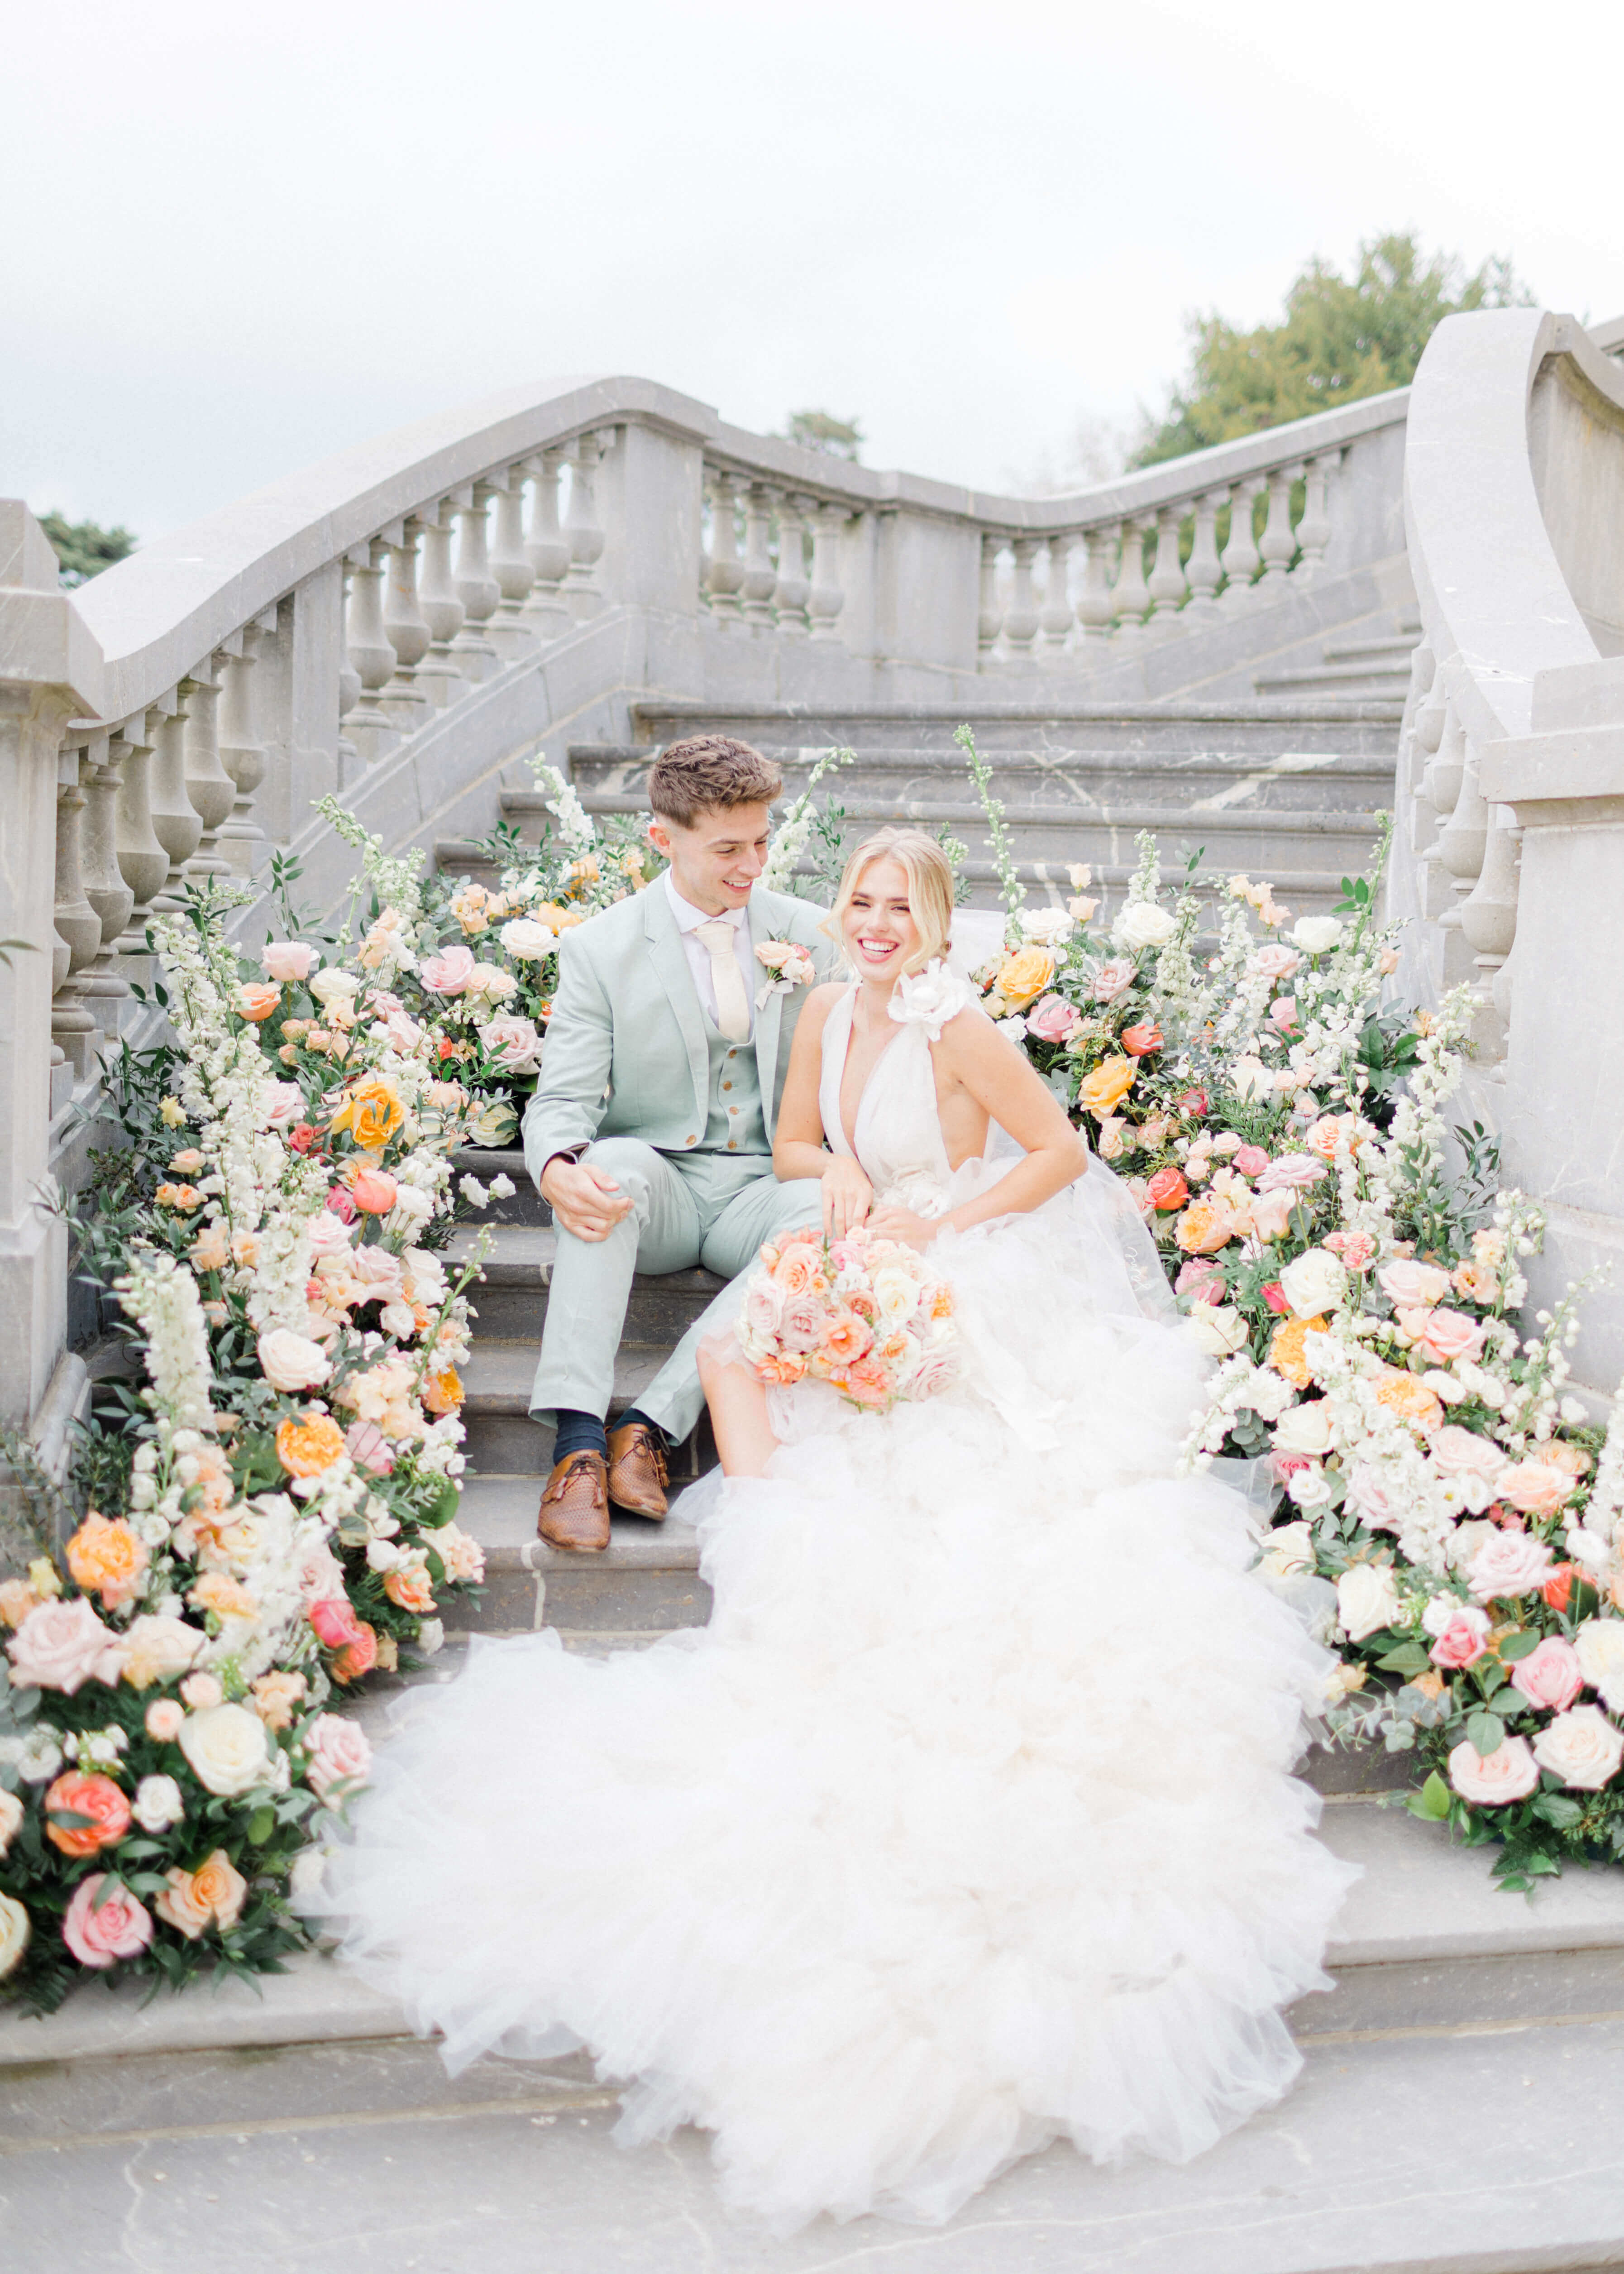 Pastel floral meadows in a semi arch on a staircase at chateau bouffemont, with newly weds sitting  in front of it. The groom is wearing a mint tux and cream tie on a white shirt. The bride's hair is tied in a high bun and she's wearing a low cut decoletté ruffle white dress.